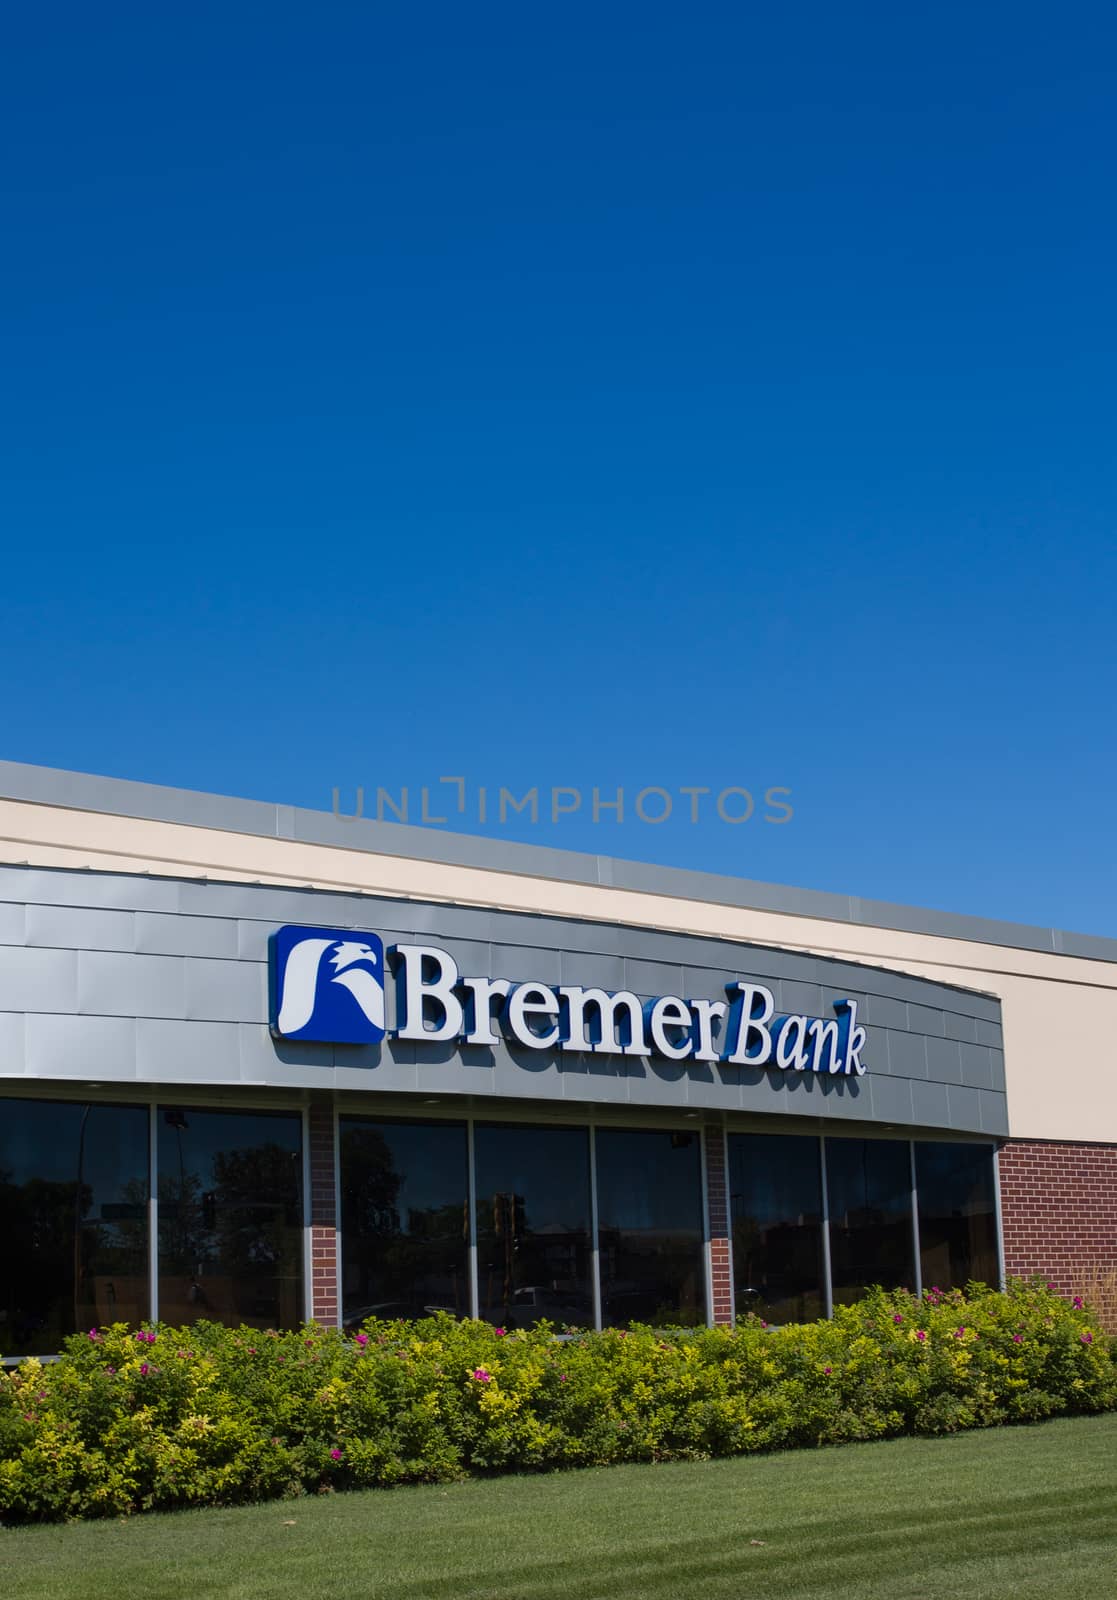 EDINA, MN/USA - AUGUST 11, 2015: Bremer Bank exterior. Bremer Bank is the name of the banks owned by the Bremer Financial Corporation.